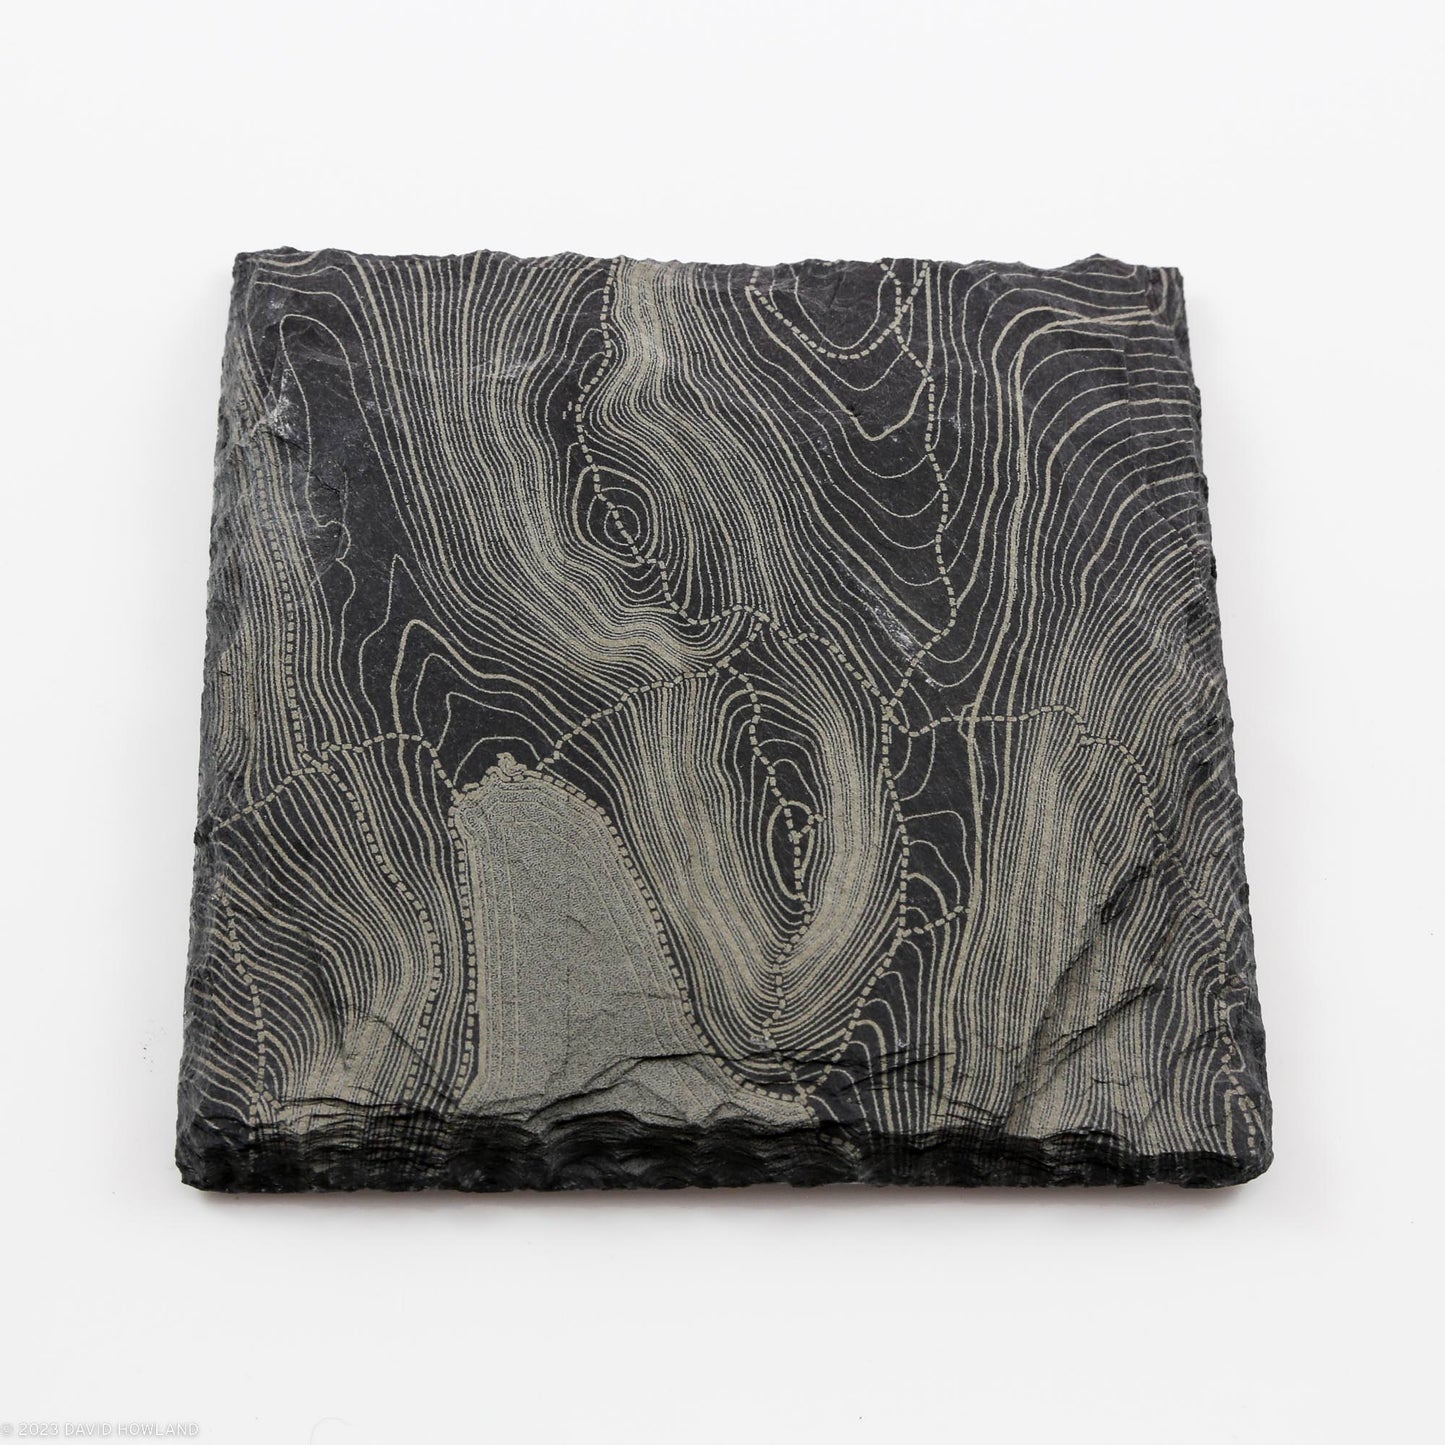 North and South Bubble Acadia National Park Topographic Map Slate Coaster